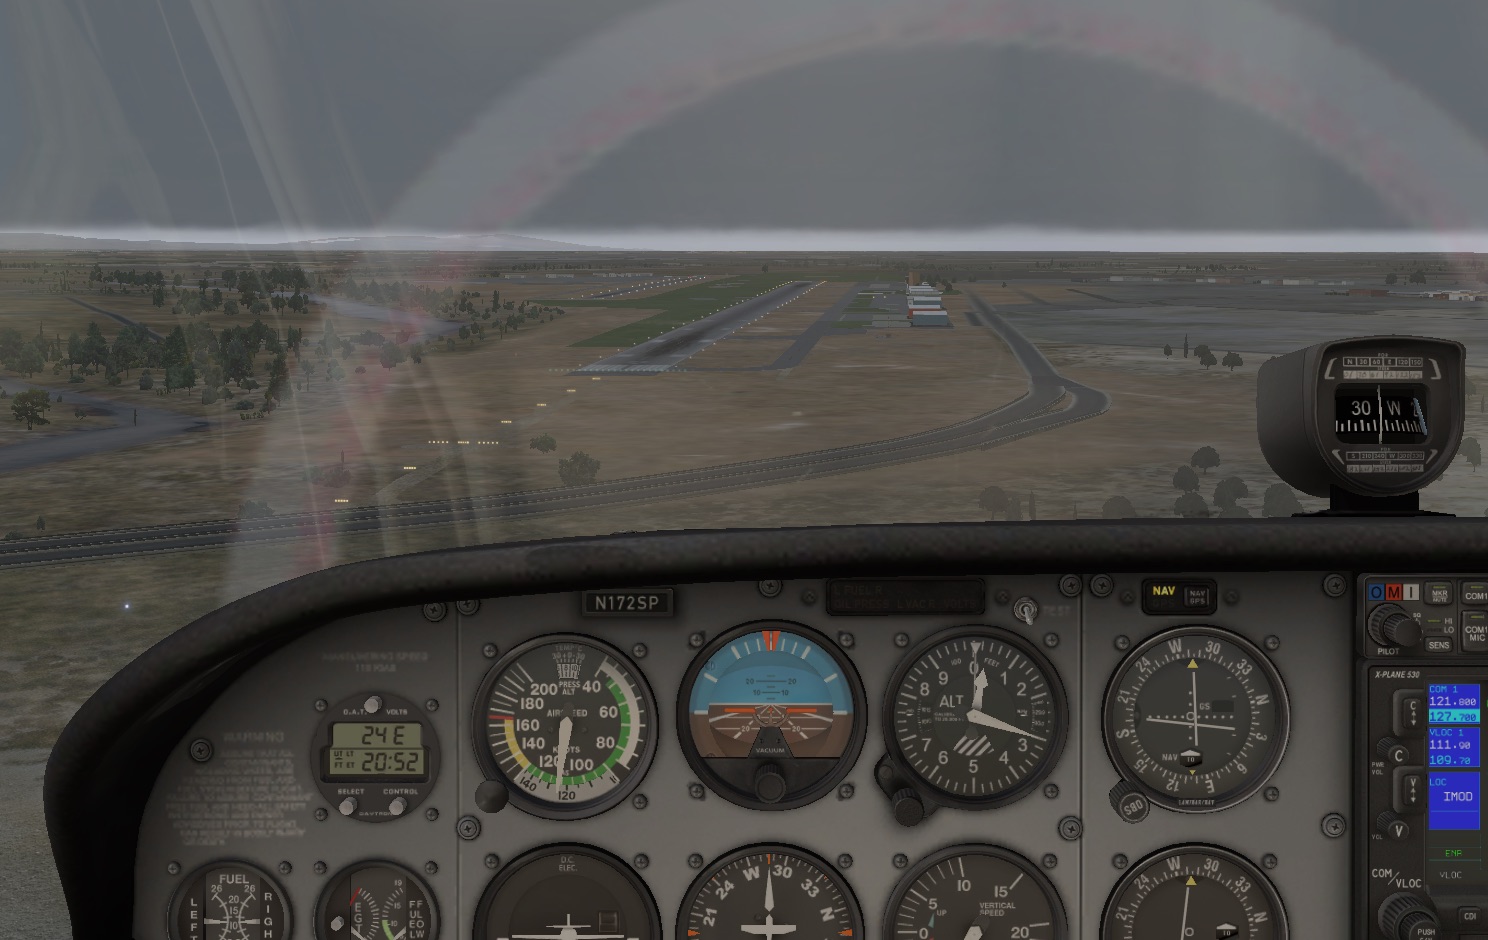 ILS 28R at Modesto, localizer is off